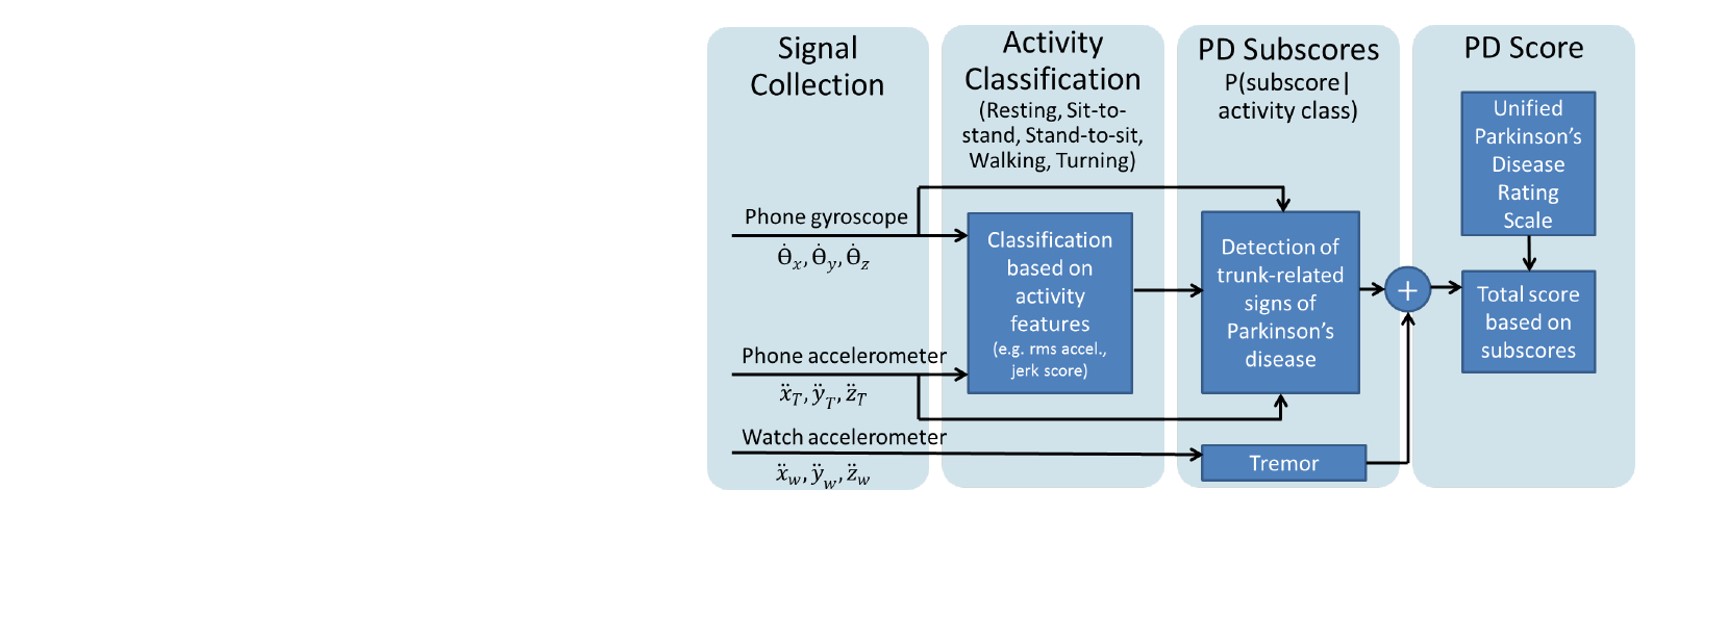 Remote Smartphone Monitoring for Management of PD... (PETRA, 2013)